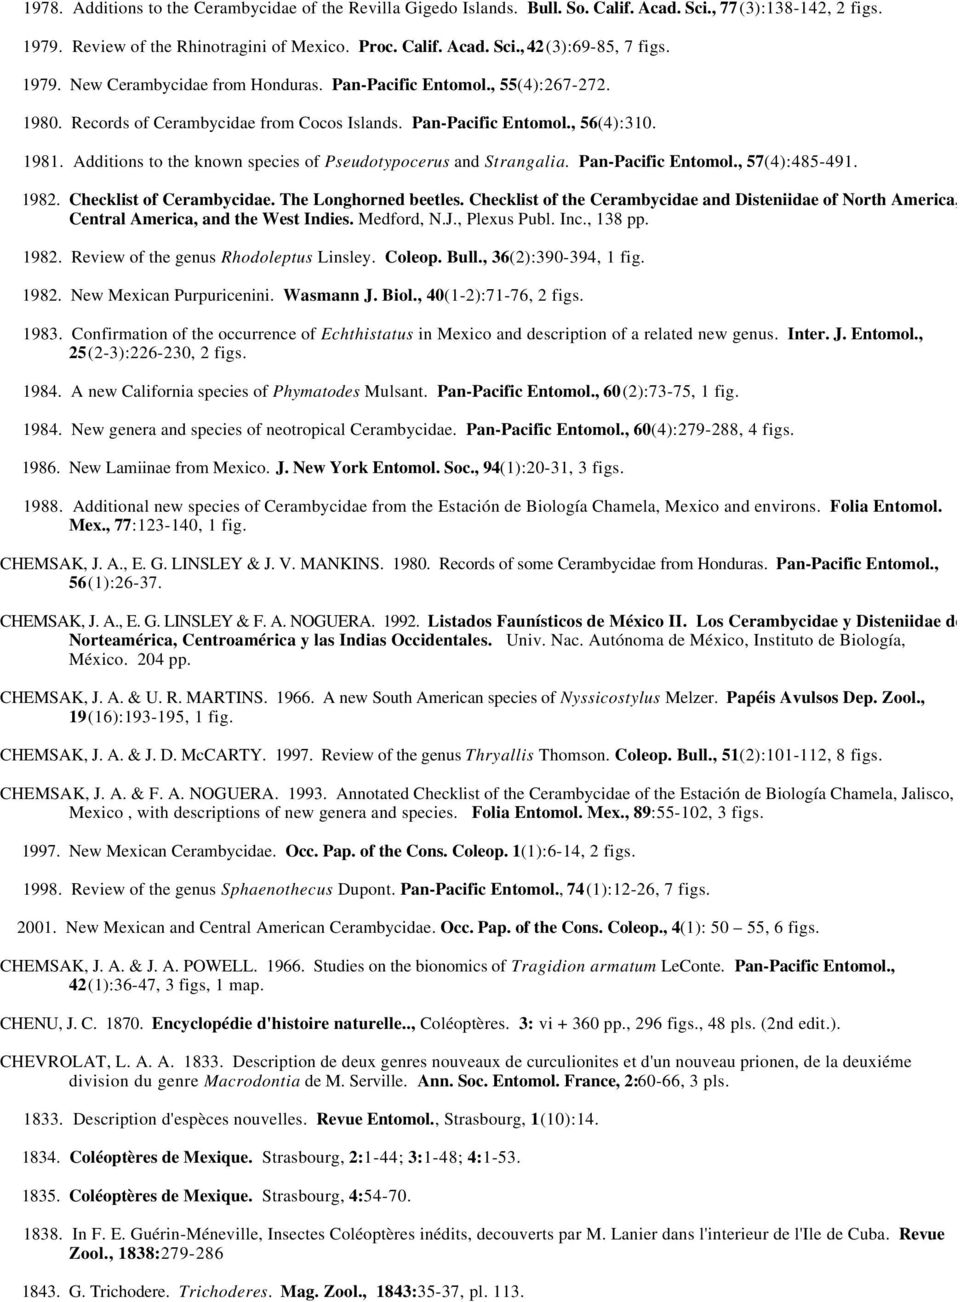 Additions to the known species of Pseudotypocerus and Strangalia. Pan-Pacific Entomol., 57(4):485-491. 1982. Checklist of Cerambycidae. The Longhorned beetles.